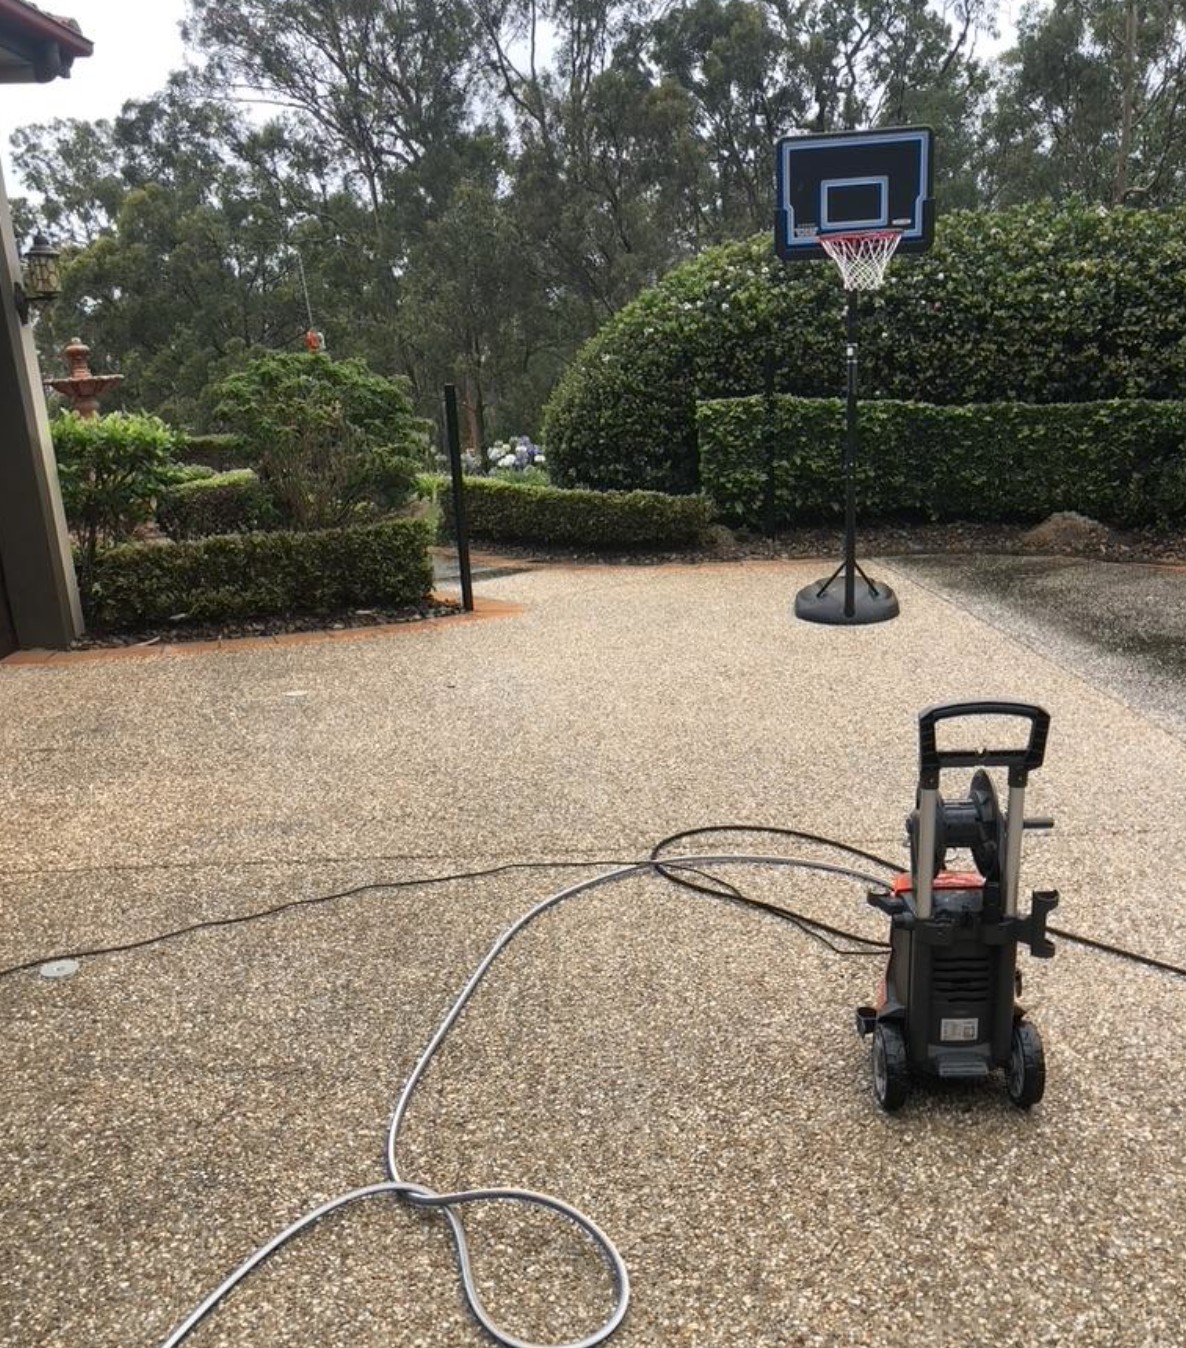 Pressure Cleaning Gold Coast